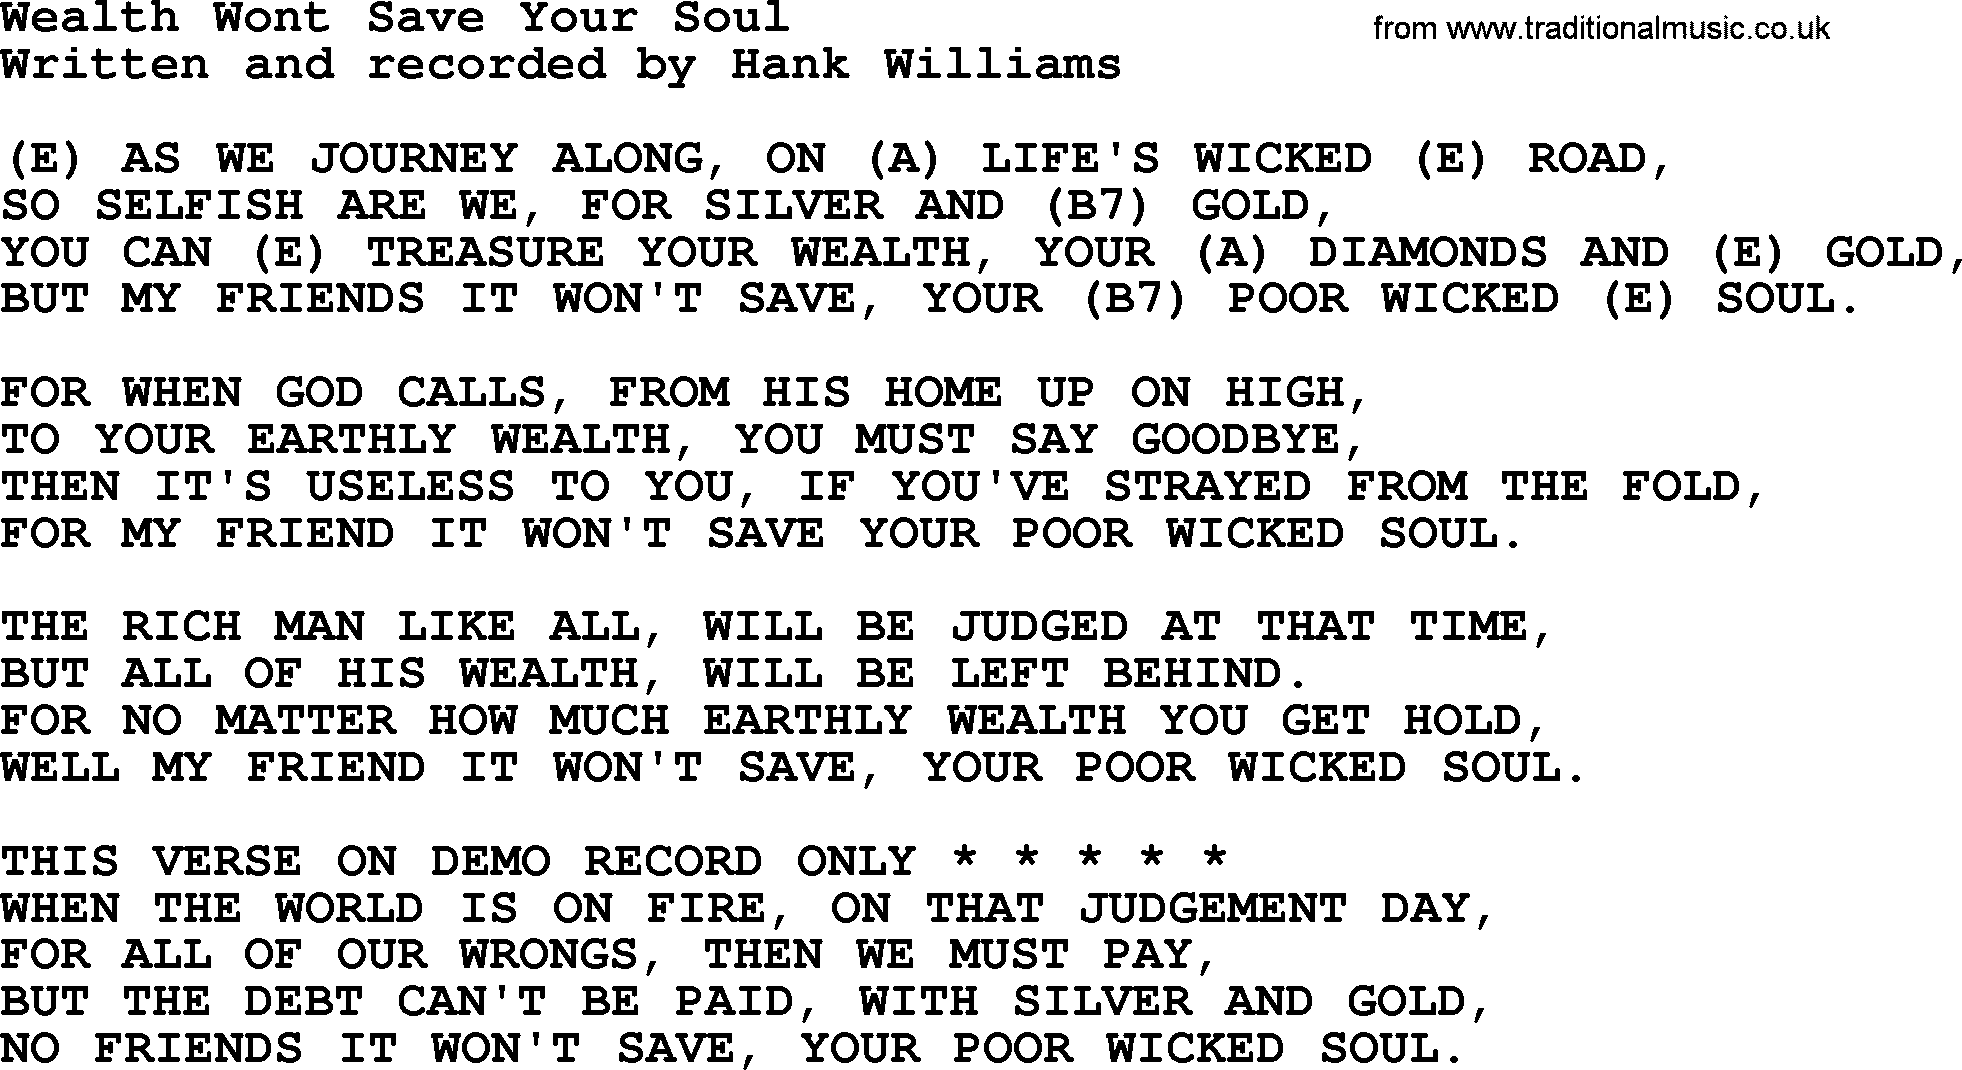 Hank Williams song Wealth Wont Save Your Soul, lyrics and chords